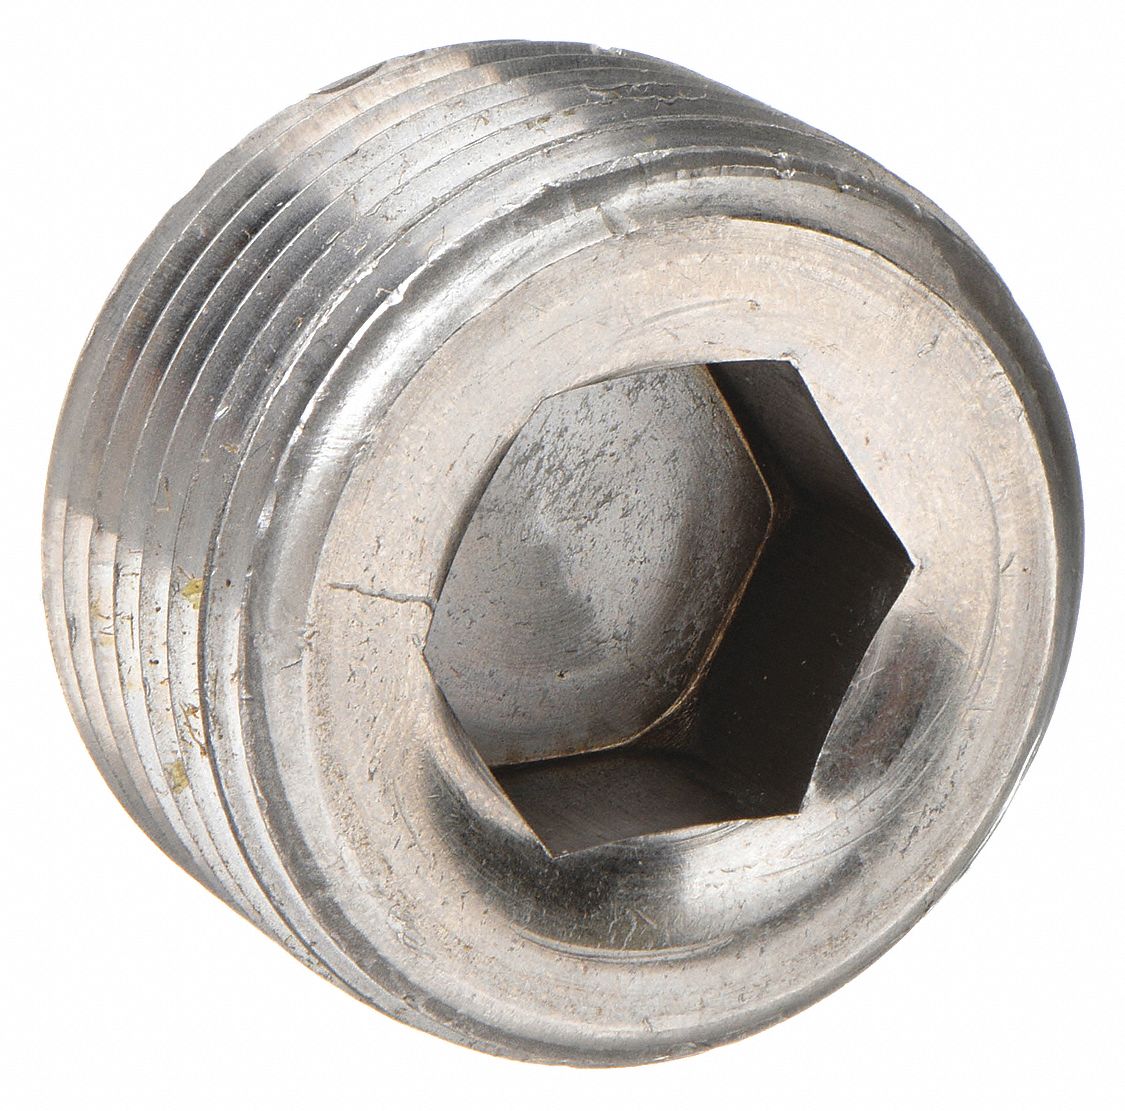 Approved Vendor Hex Recessed Head Plugmagnetic12 In Metal Pipe